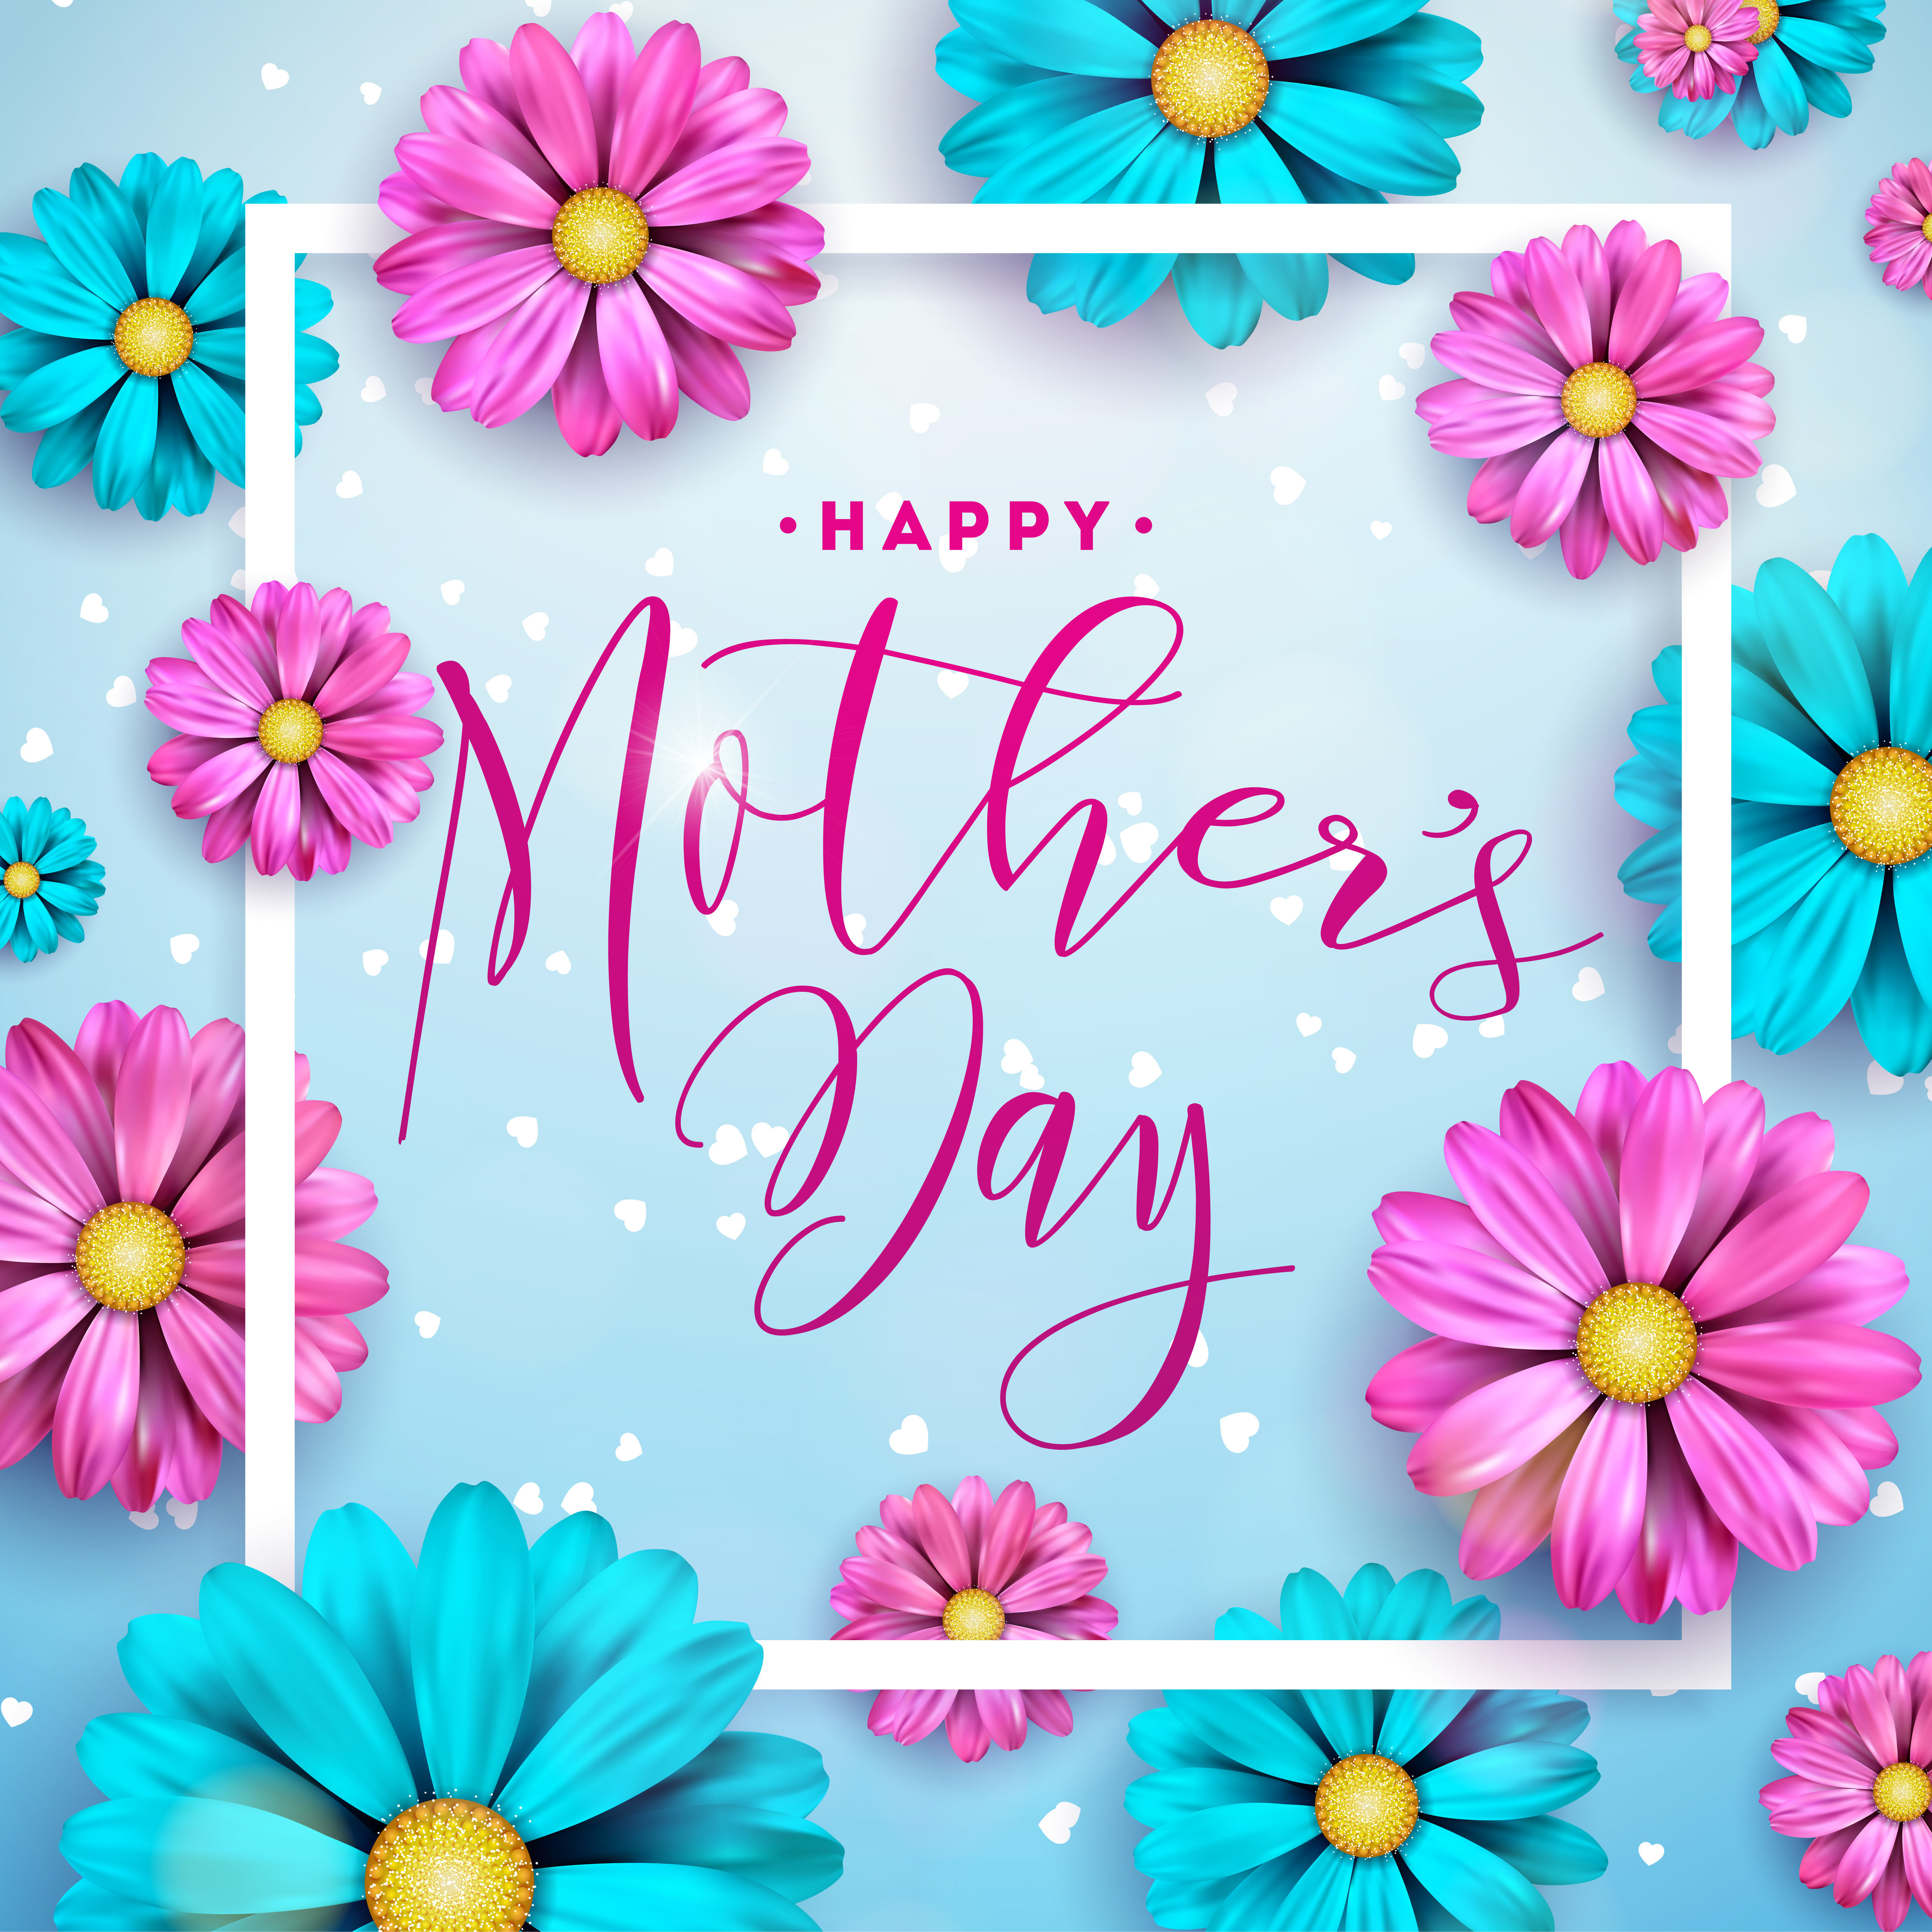 Happy Mothers Day Greeting Card Design With Flower And Typographic Elements On Blue Background